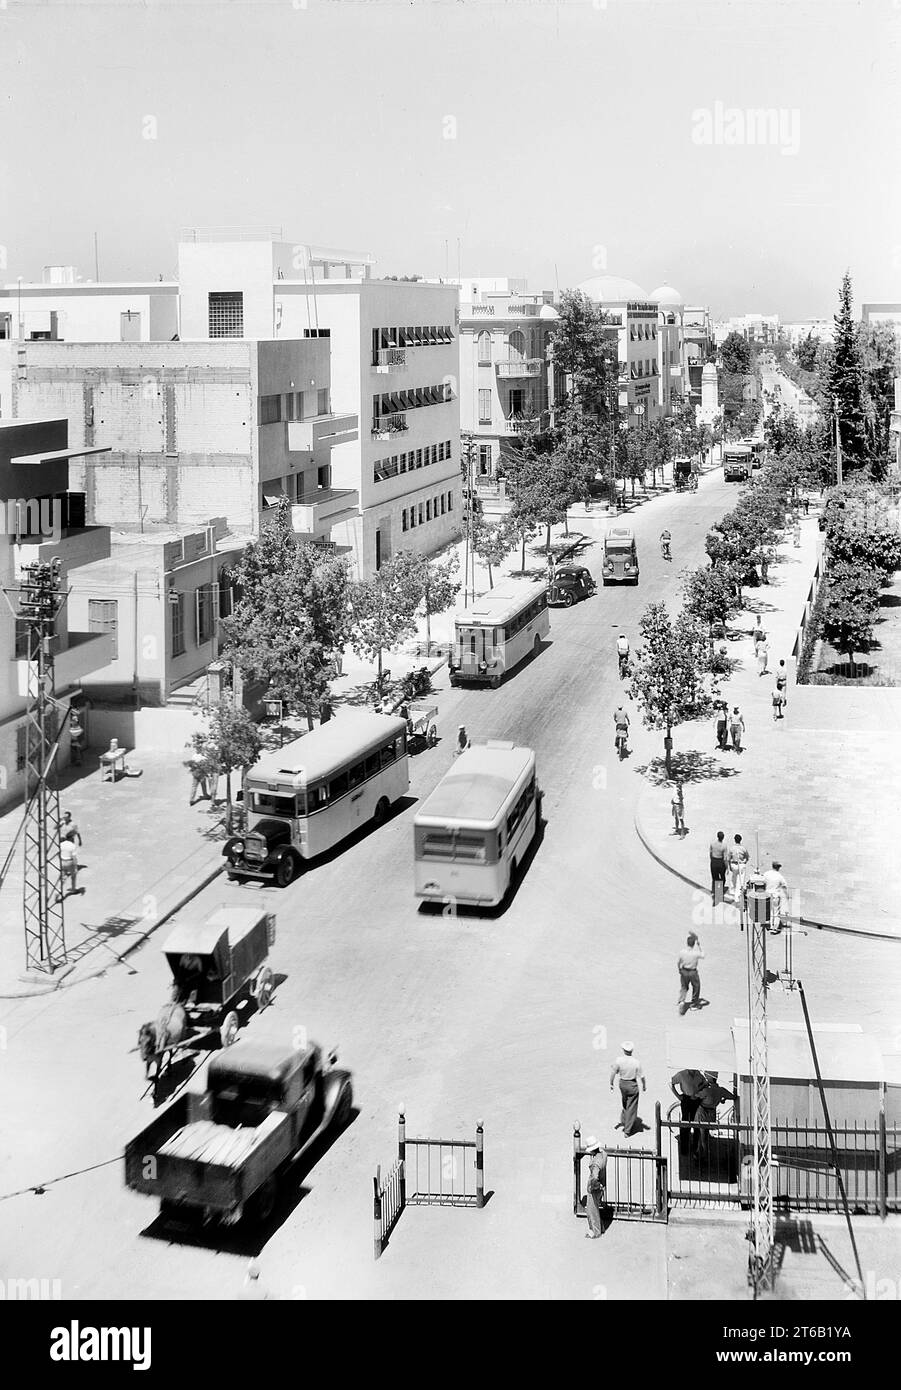 High angle view of Allenby Street, Tel Aviv, Mandatory Palestine, G. Eric and Edith Matson Photograph Collection, 1930's Stock Photo